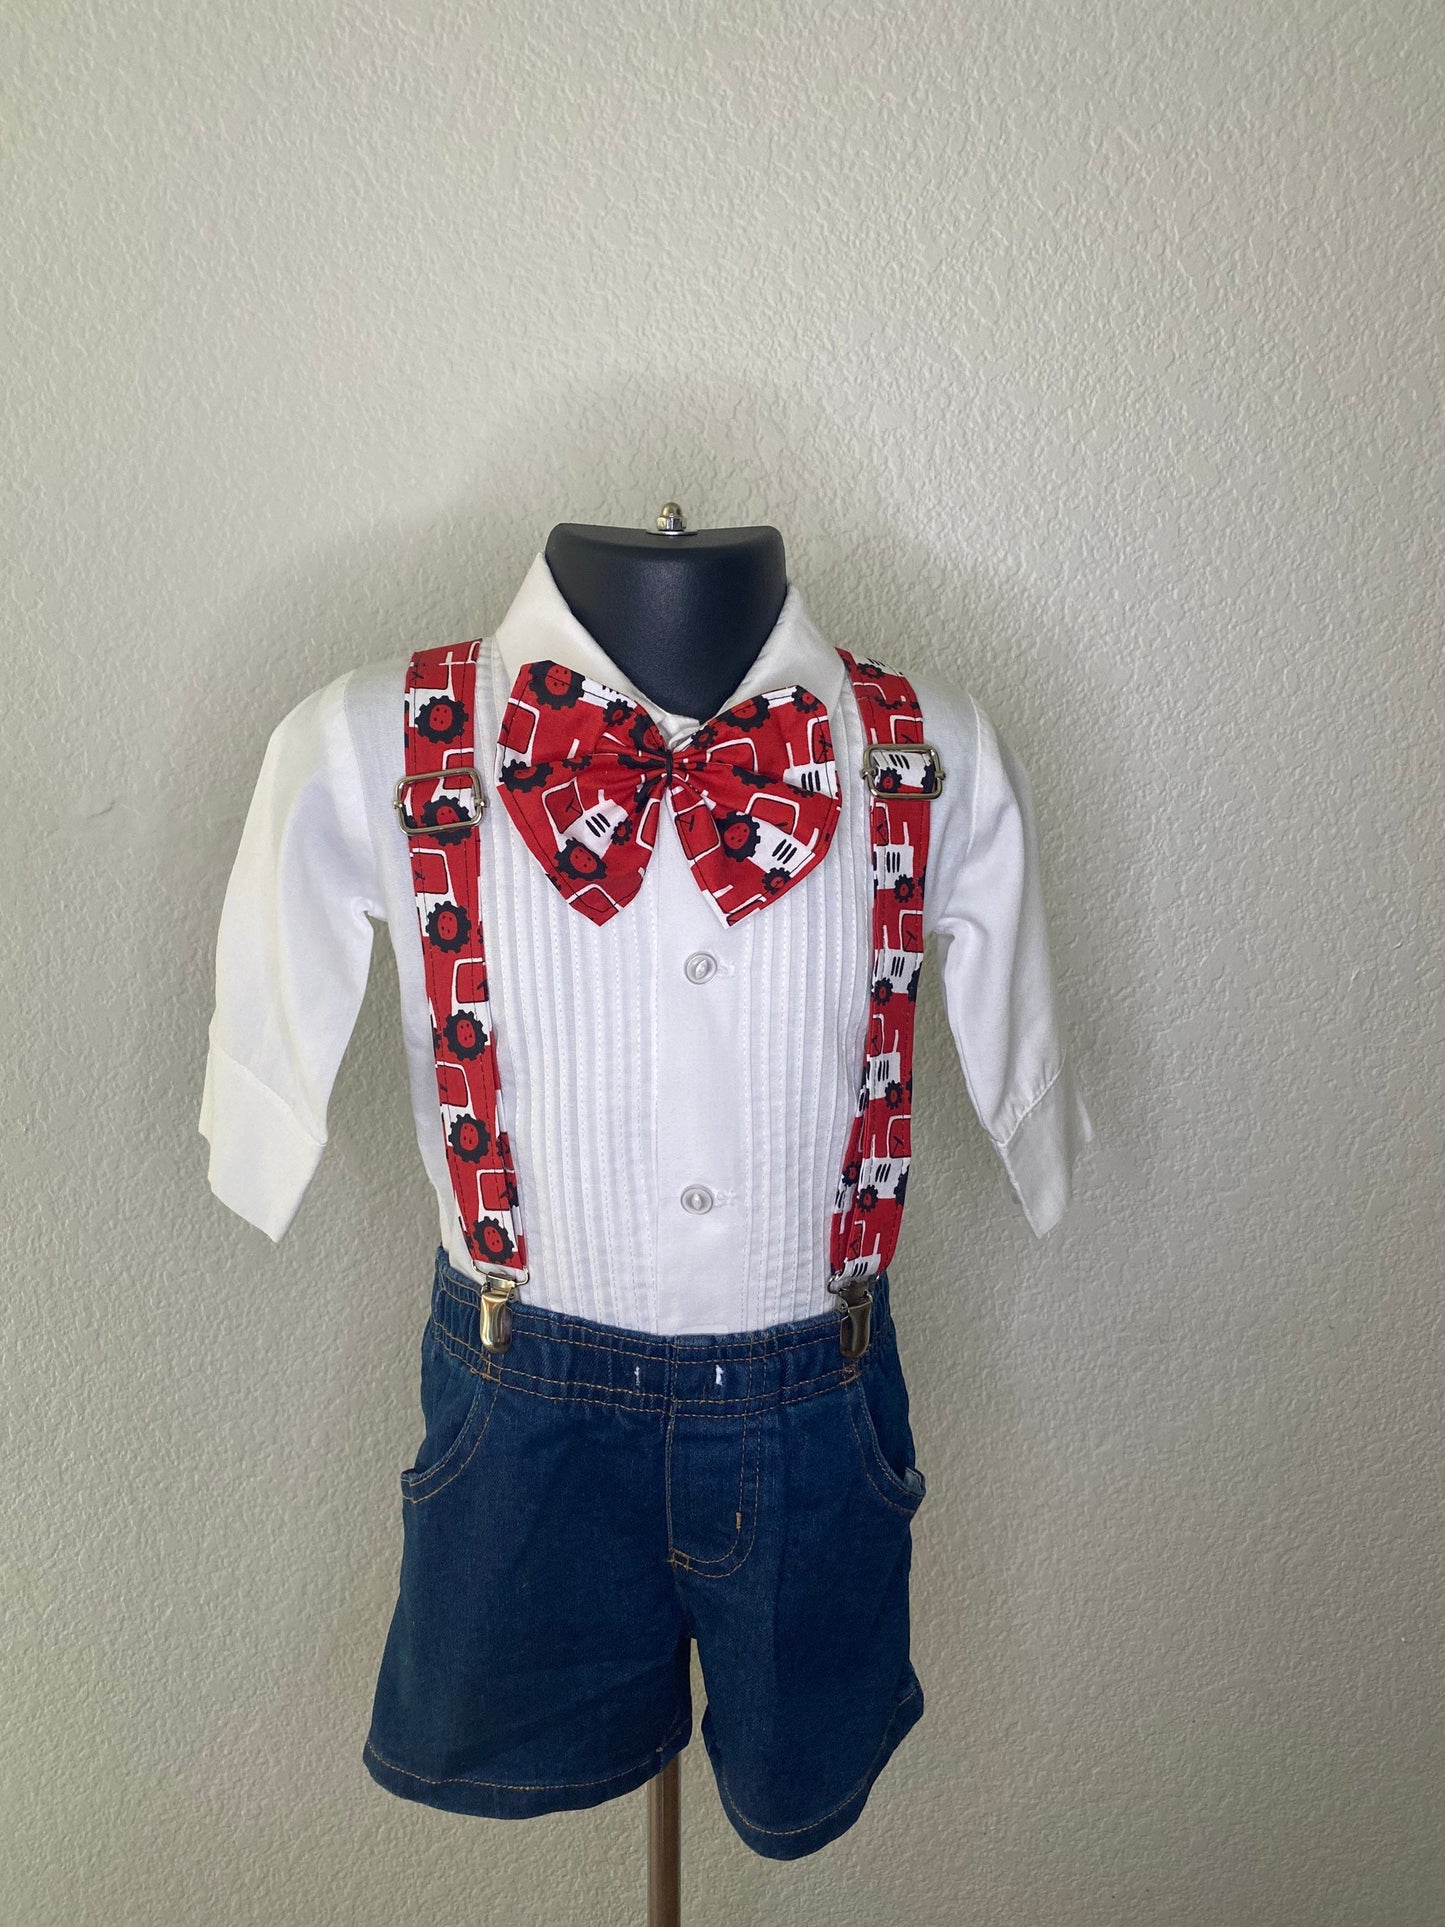 Red tractor suspenders and bow tie / Infant, Toddler, Child, Teen, Adult, Big & Tall